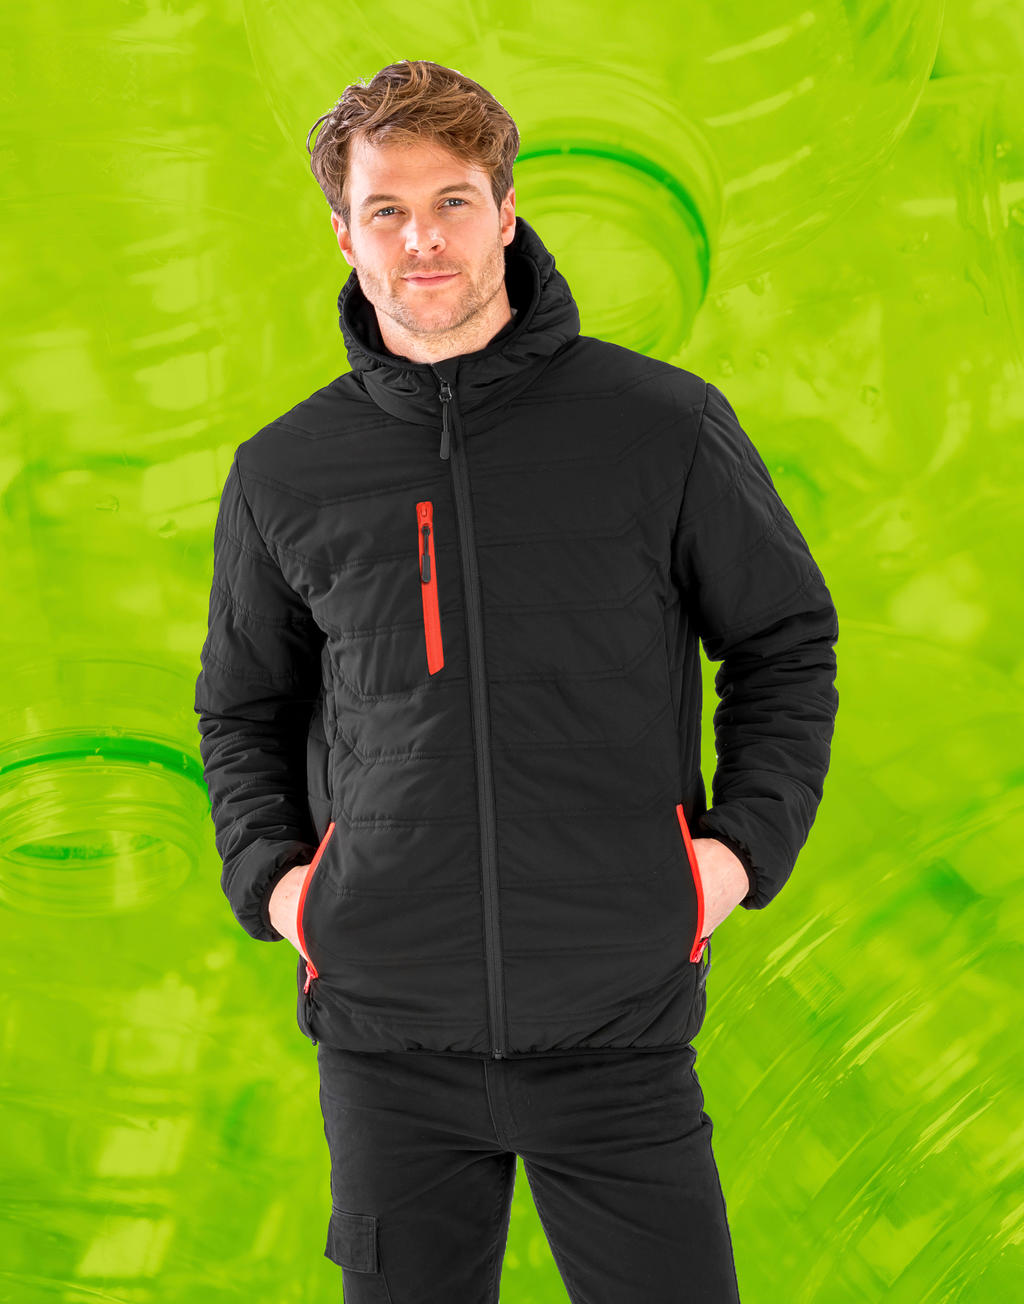  Black Compass Padded Winter Jacket in Farbe Black/Grey